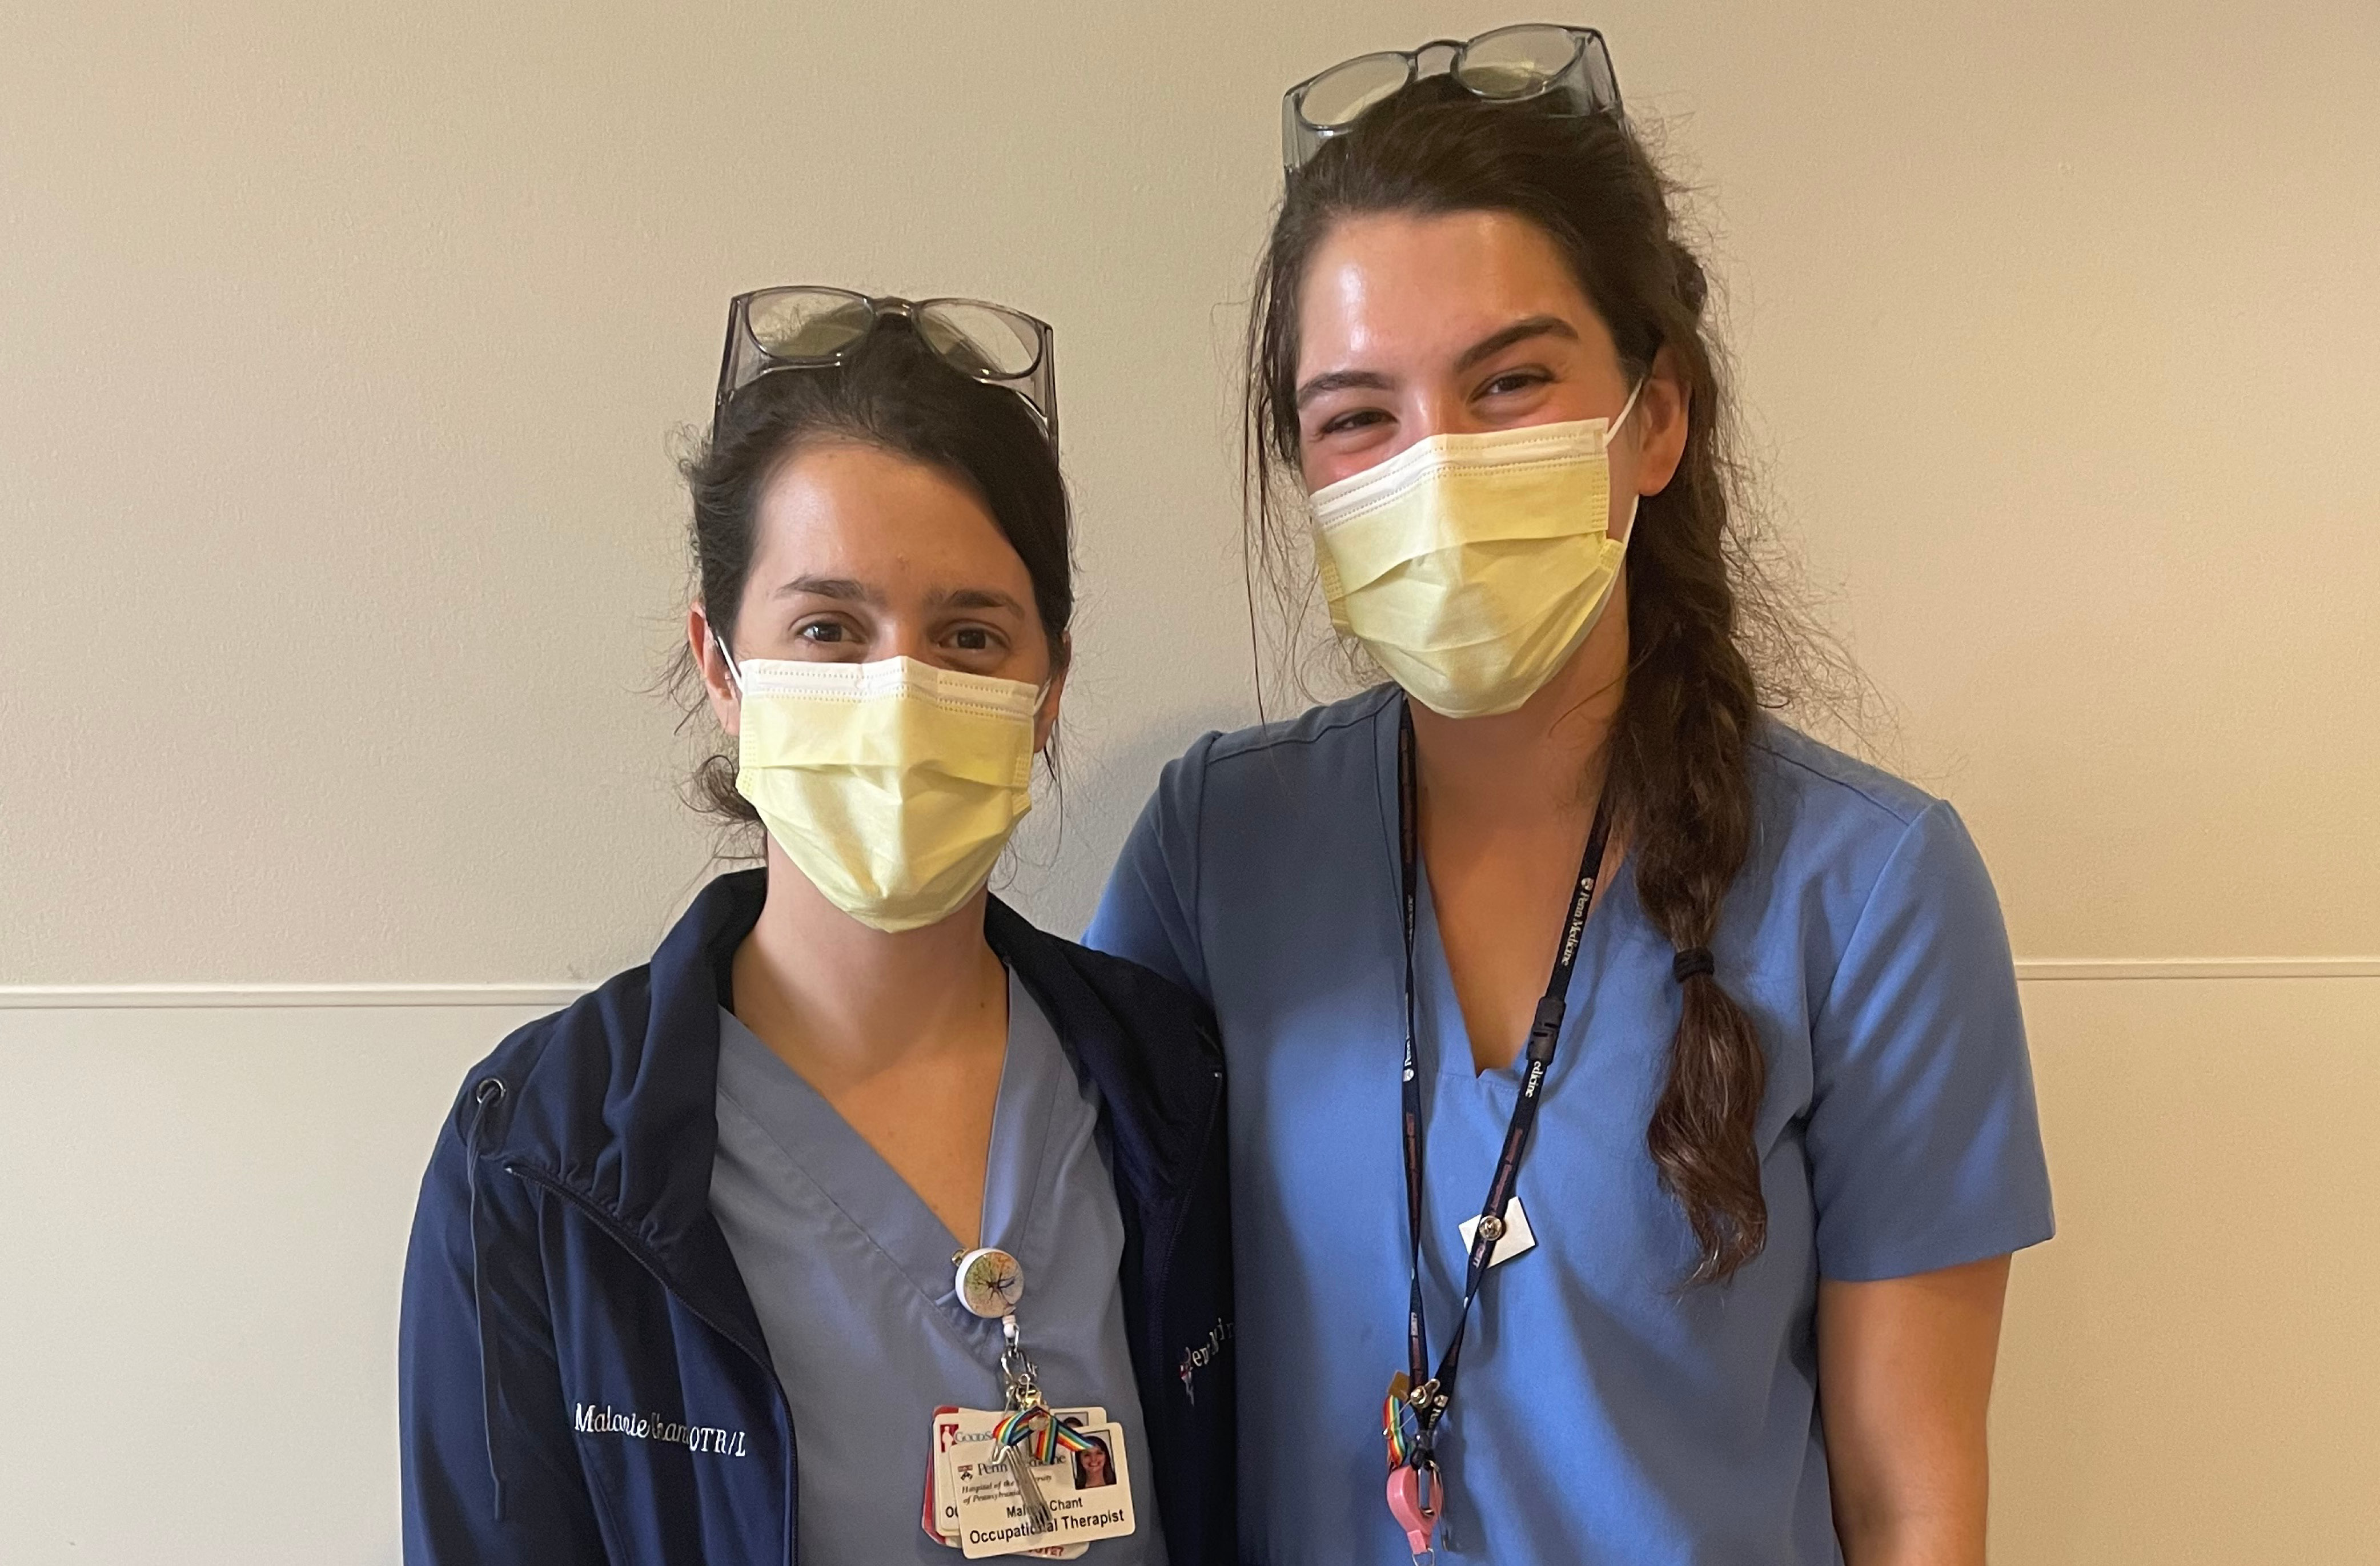 Occupational therapist Malarie Chant (left) and physical therapist Dayna Brooks stand side by side wearing hospital scrubs.